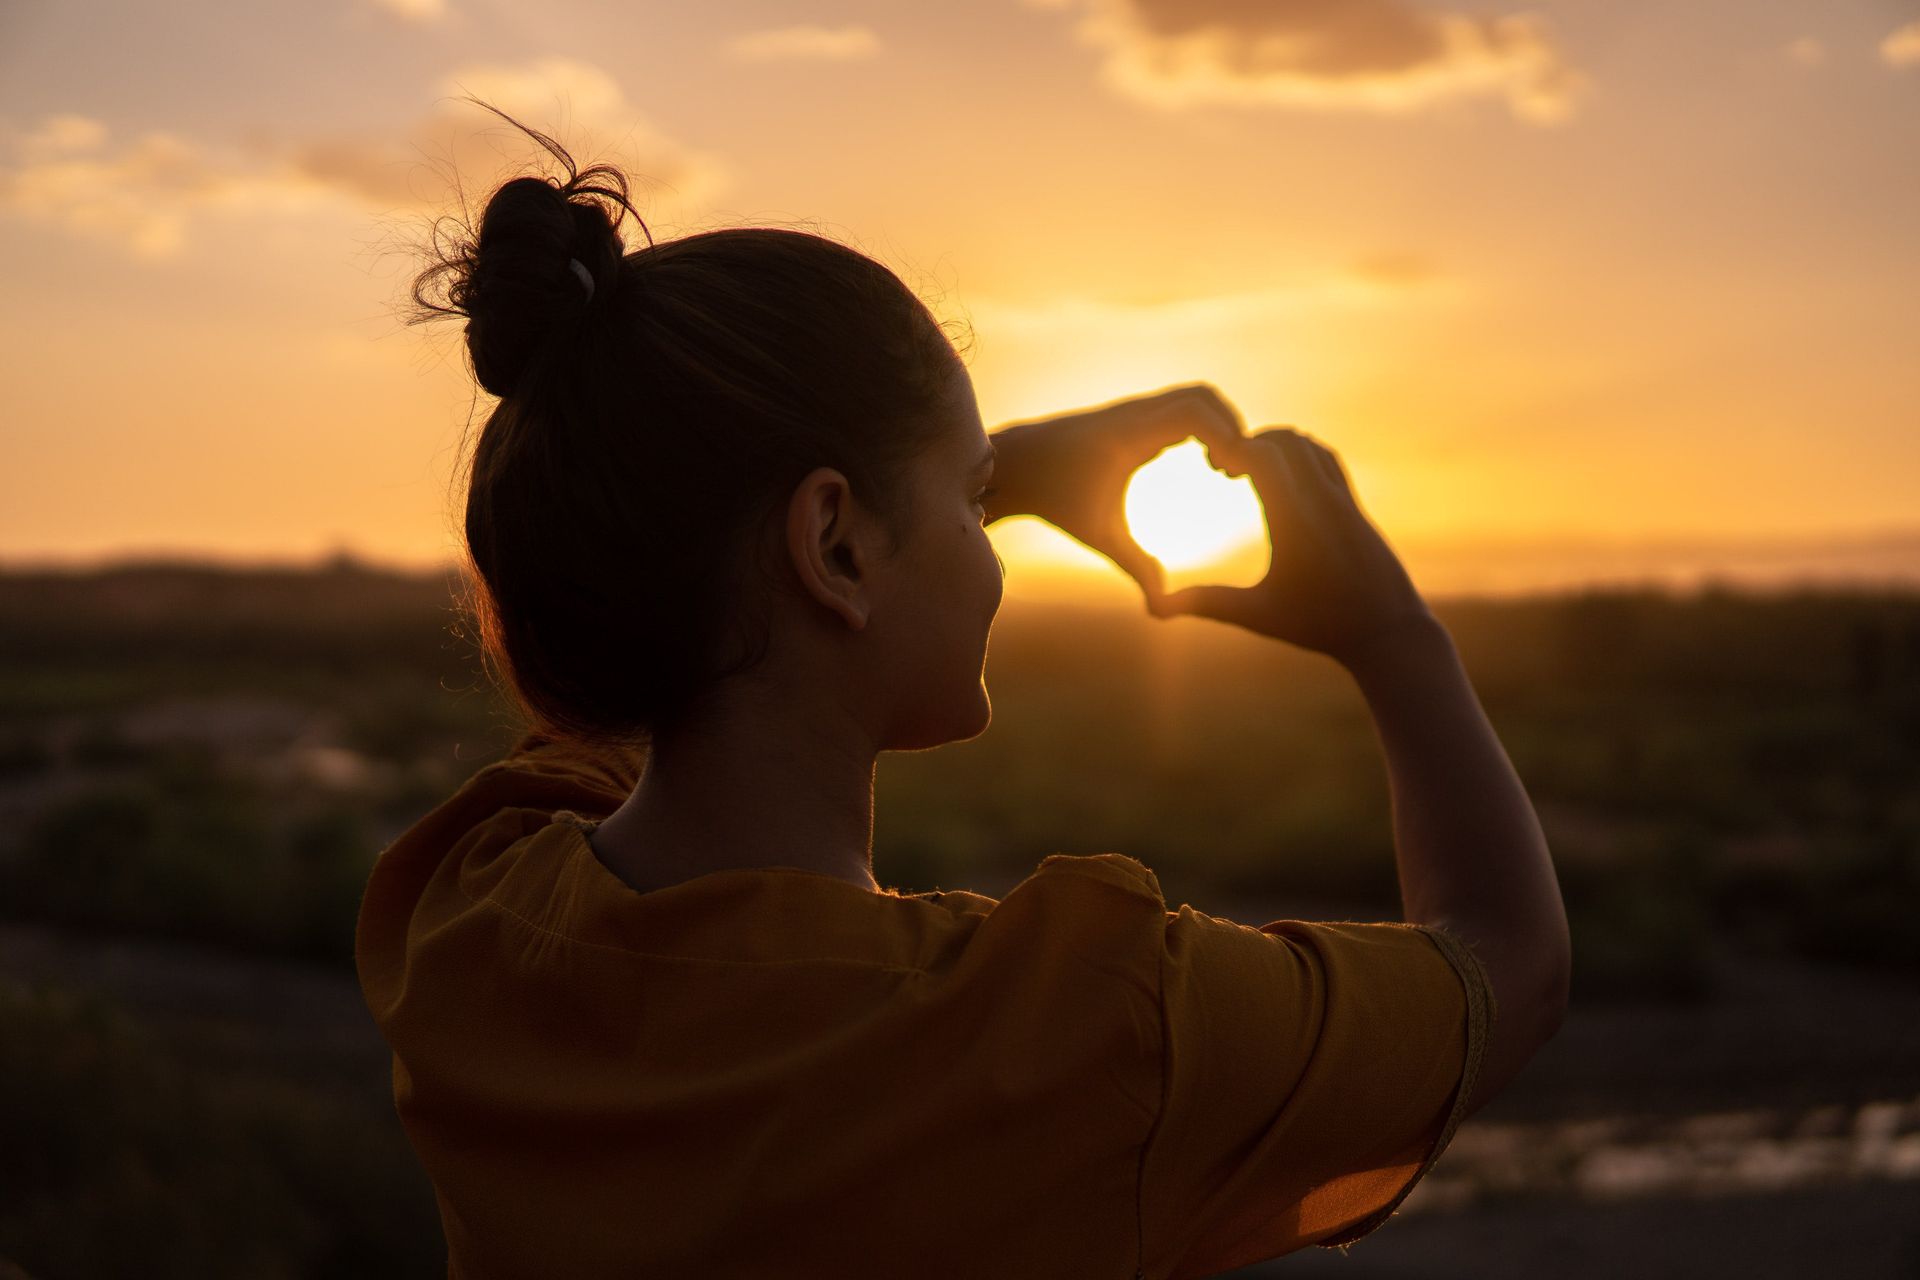 Silhouette of a woman making a heart shape with her hands in the sunset